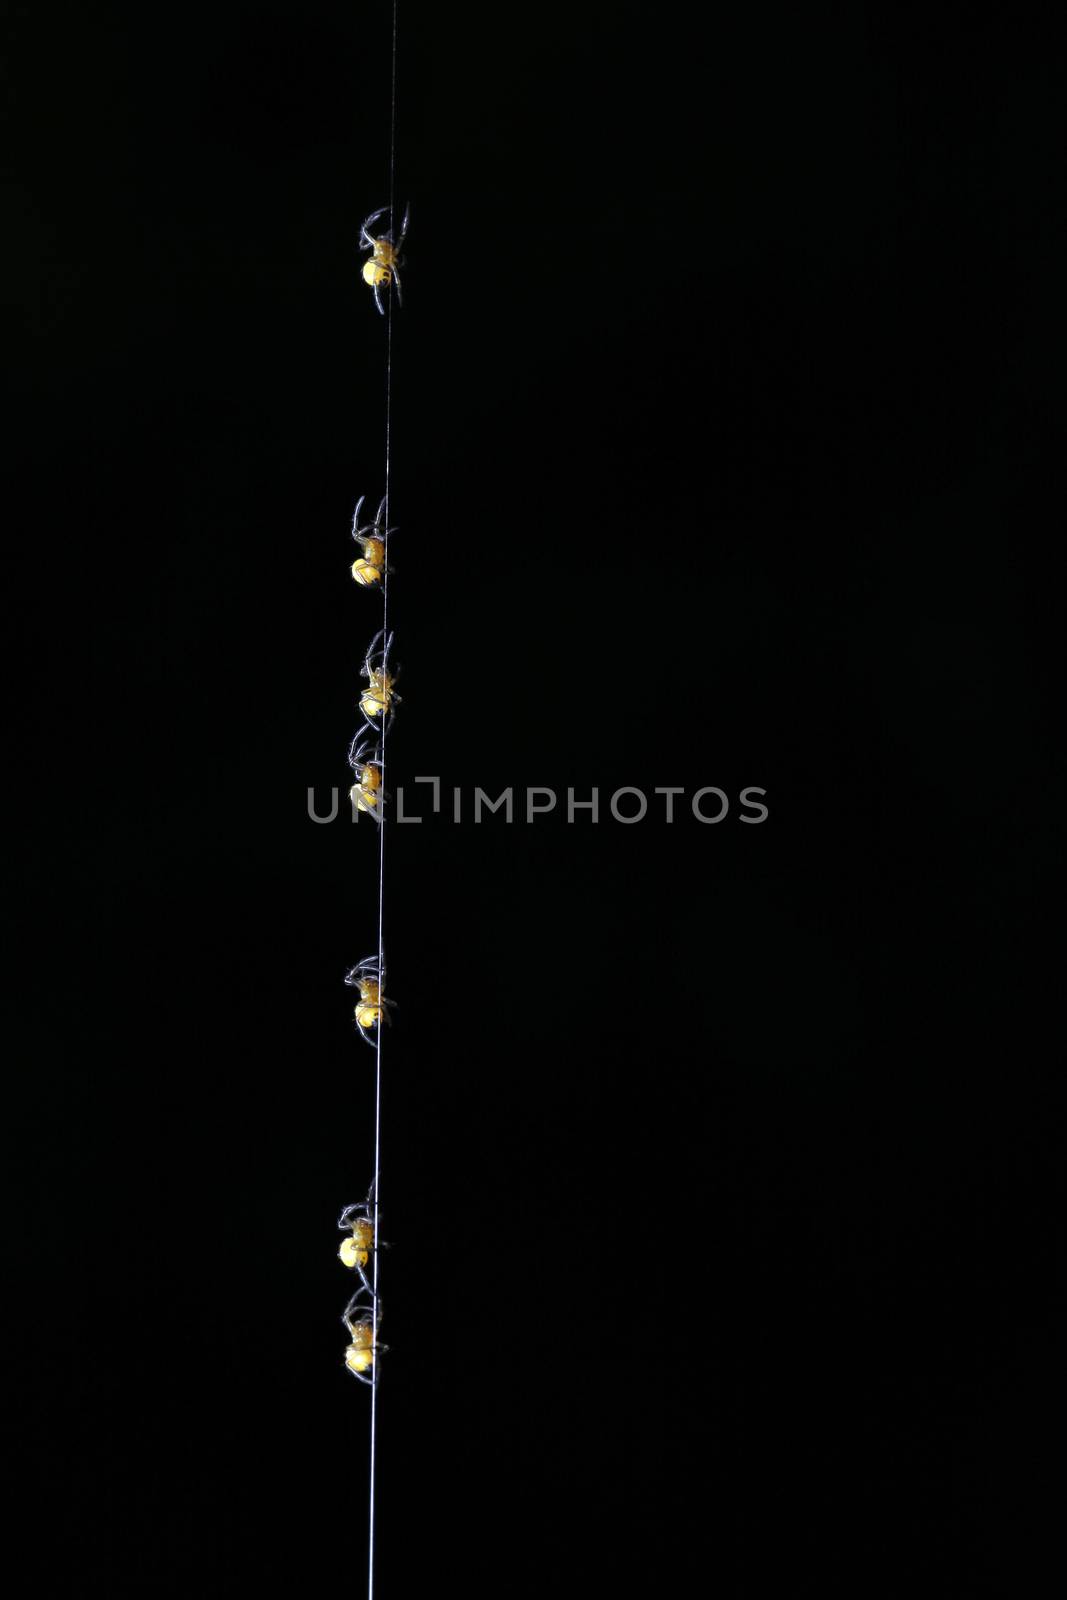 group of small spiders following one another climbing up a thread against black background